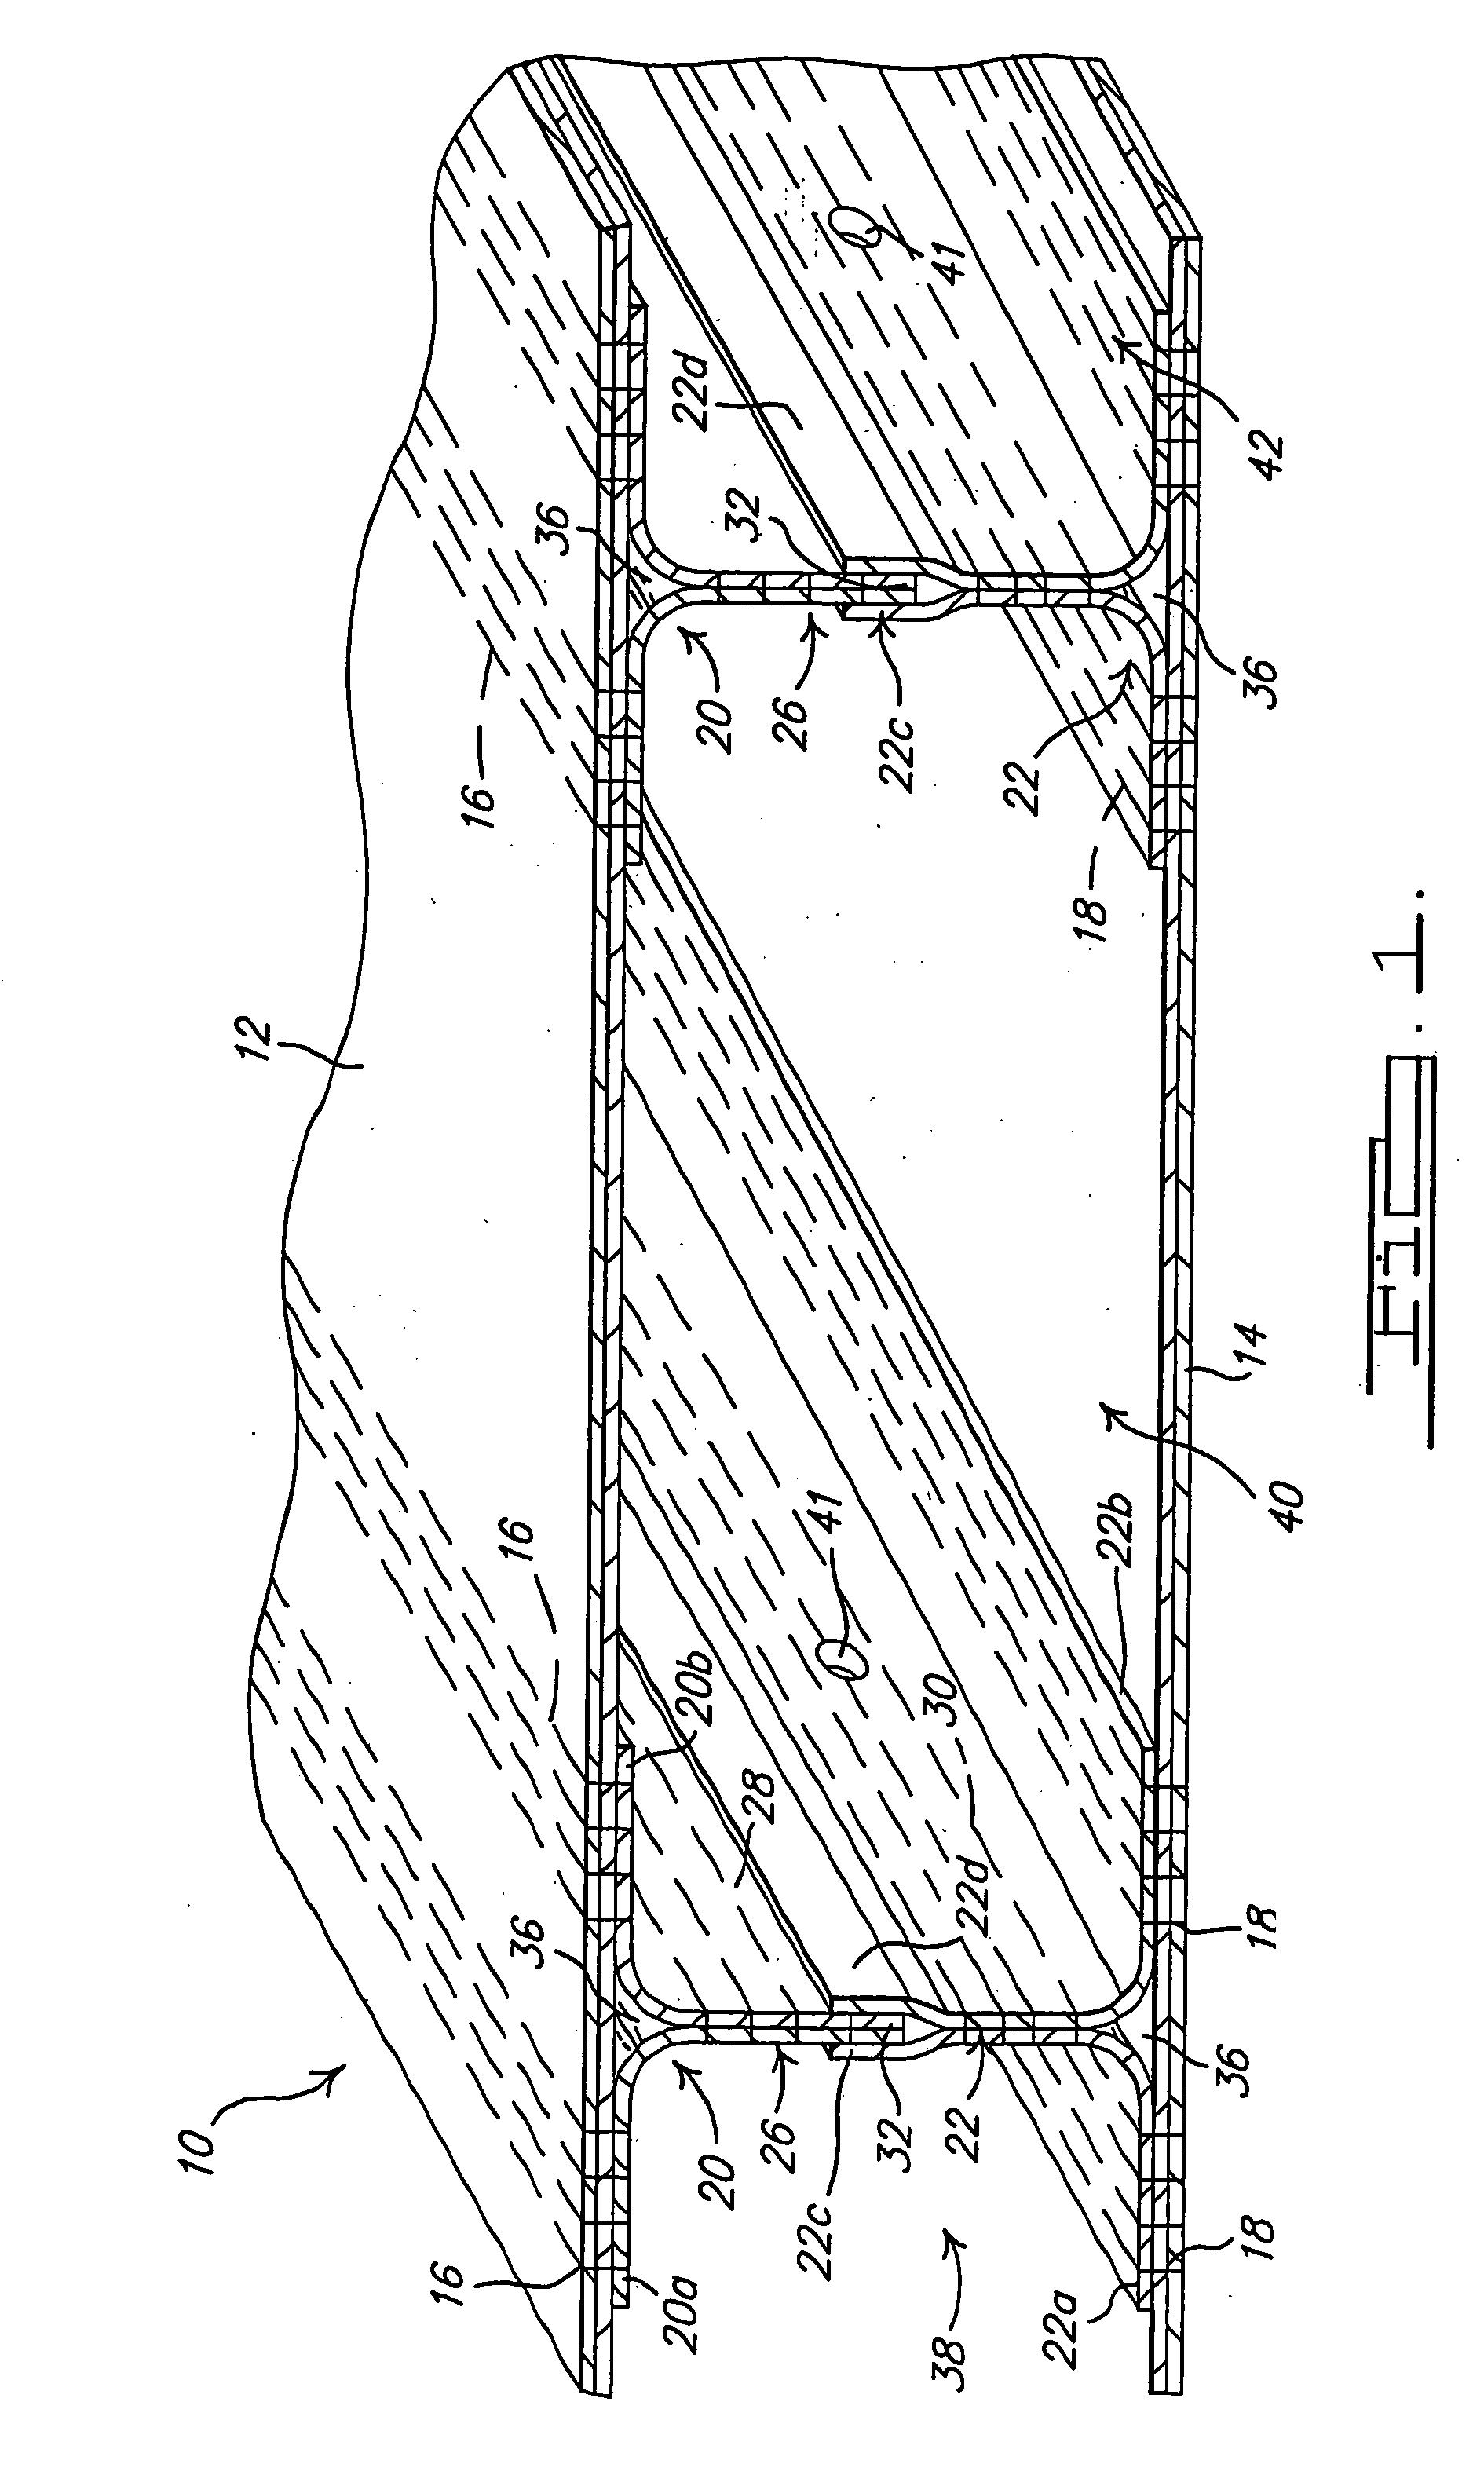 Molding process and apparatus for producing unified composite structures